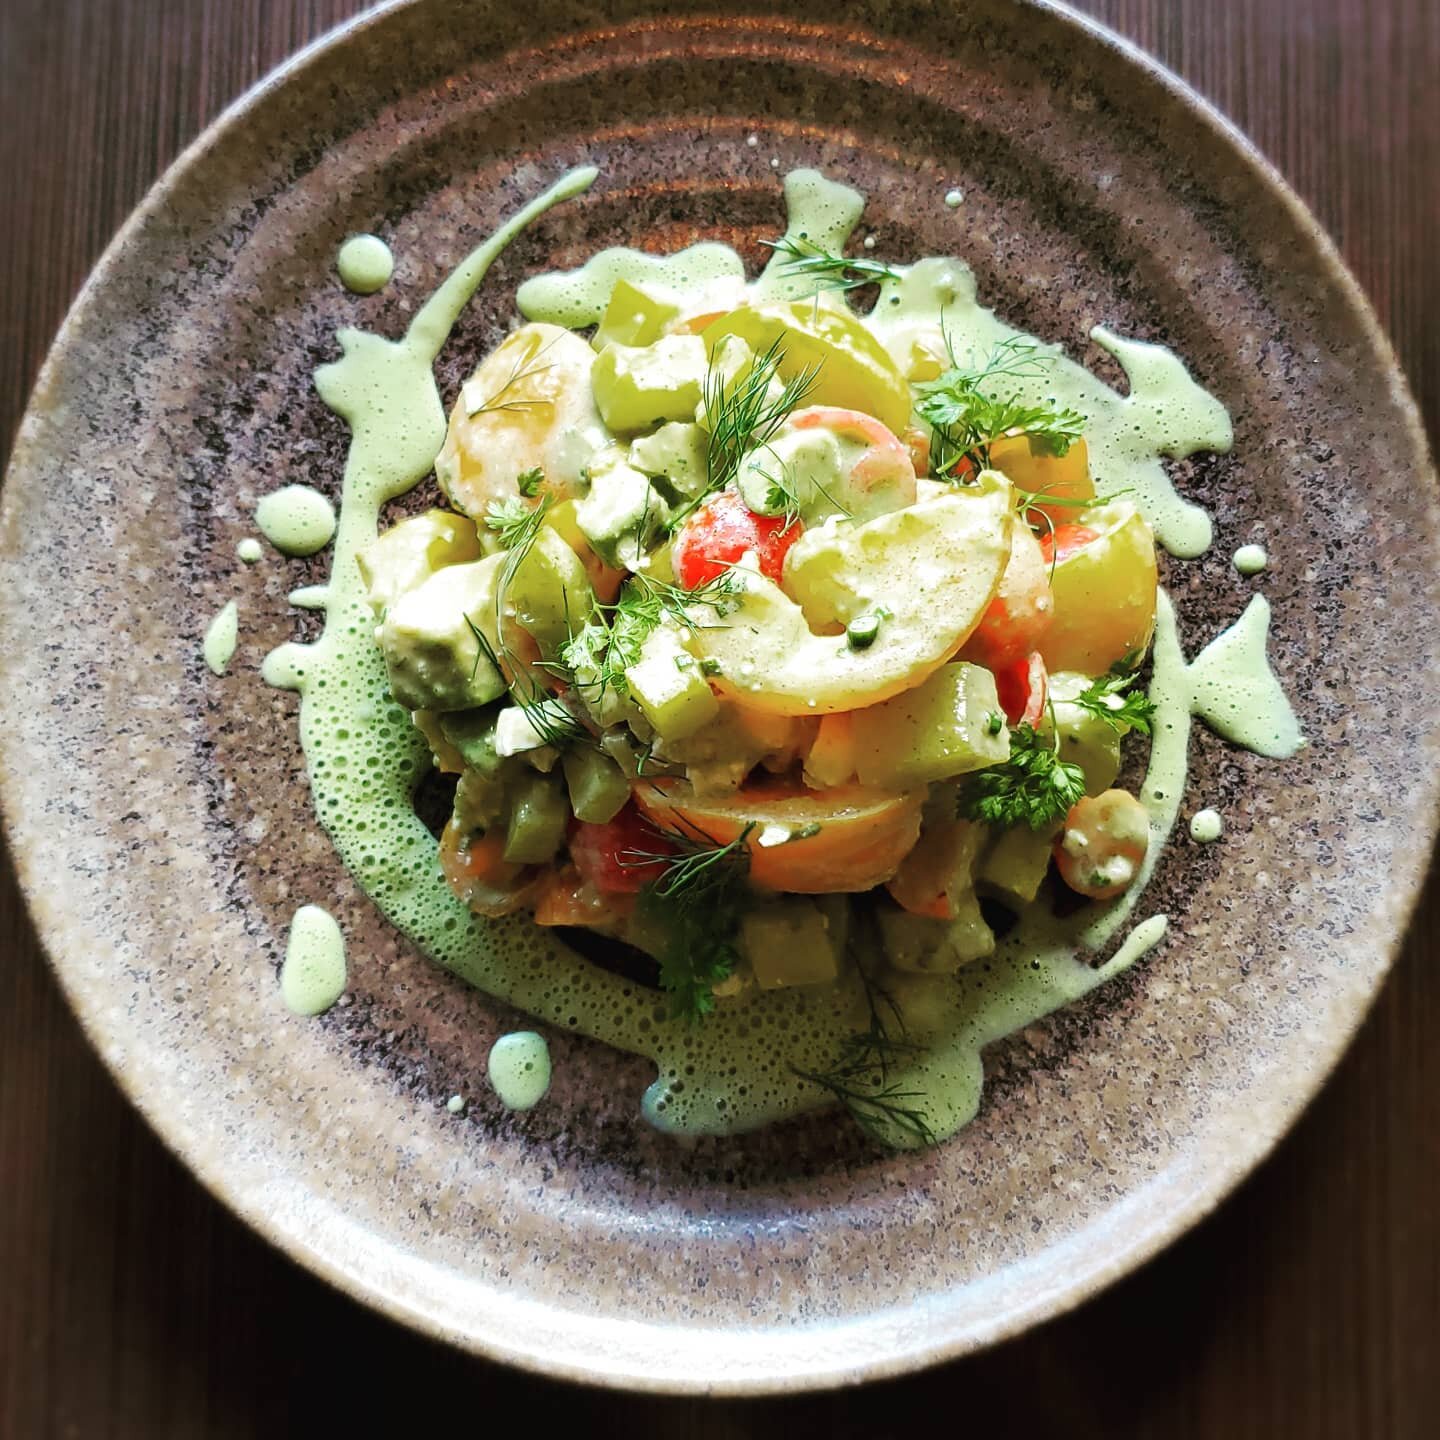 @villagegardenrva heirloom tomato salad on the menu this weekend! Buttermilk green goddess, avocado, ricotta salata, herbs. We are accepting reservations and this is also available for takeout. #rvadine